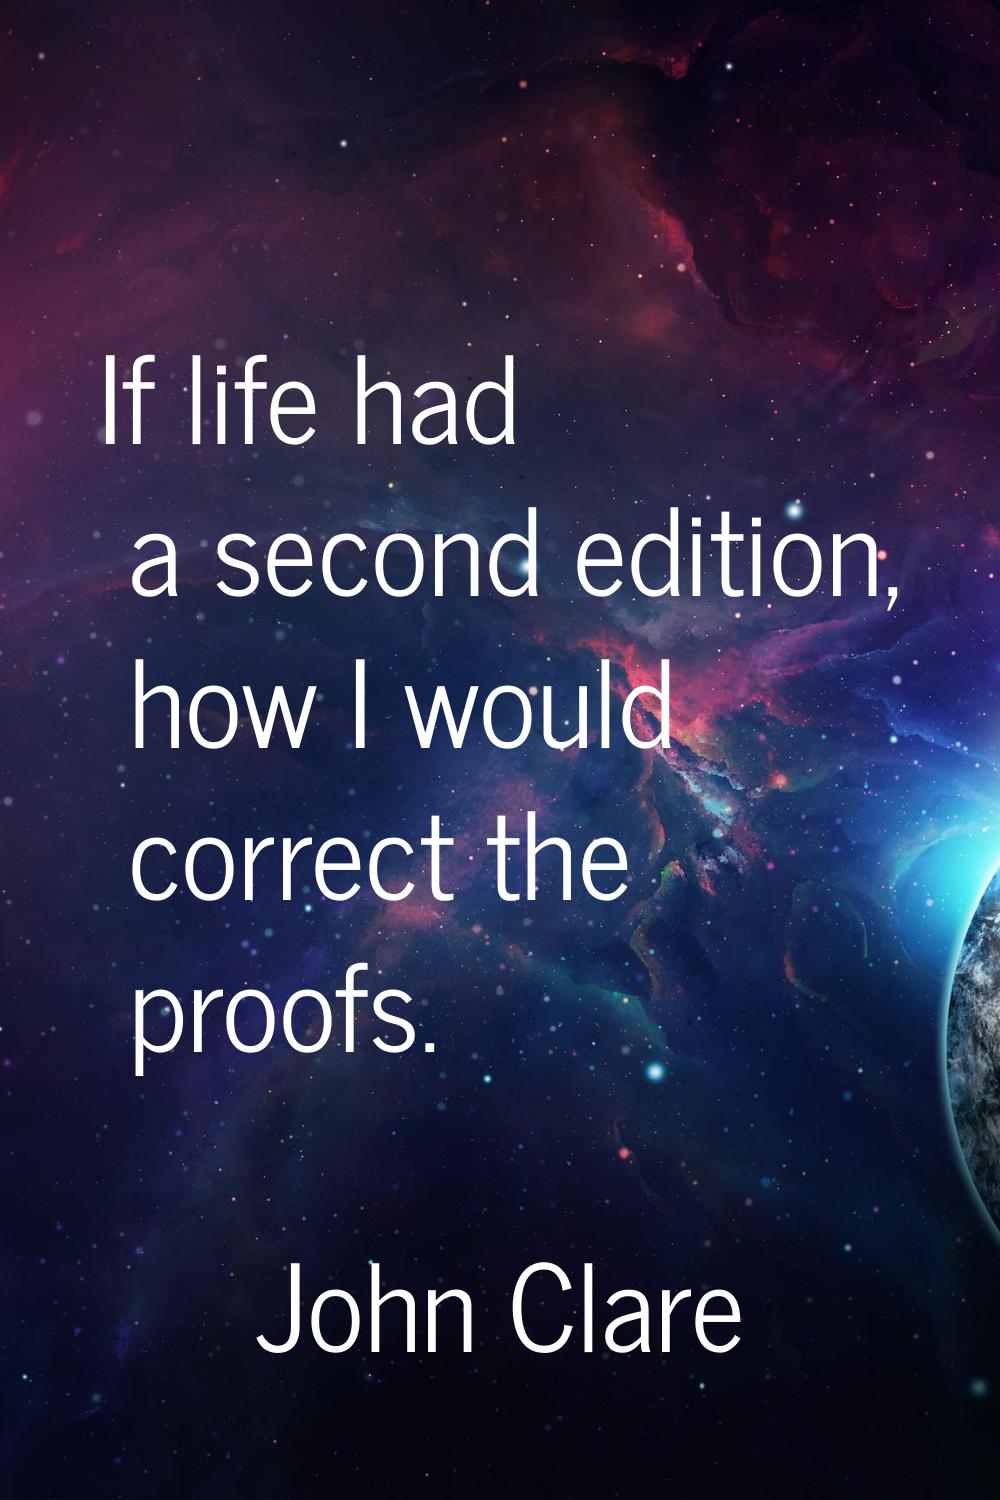 If life had a second edition, how I would correct the proofs.